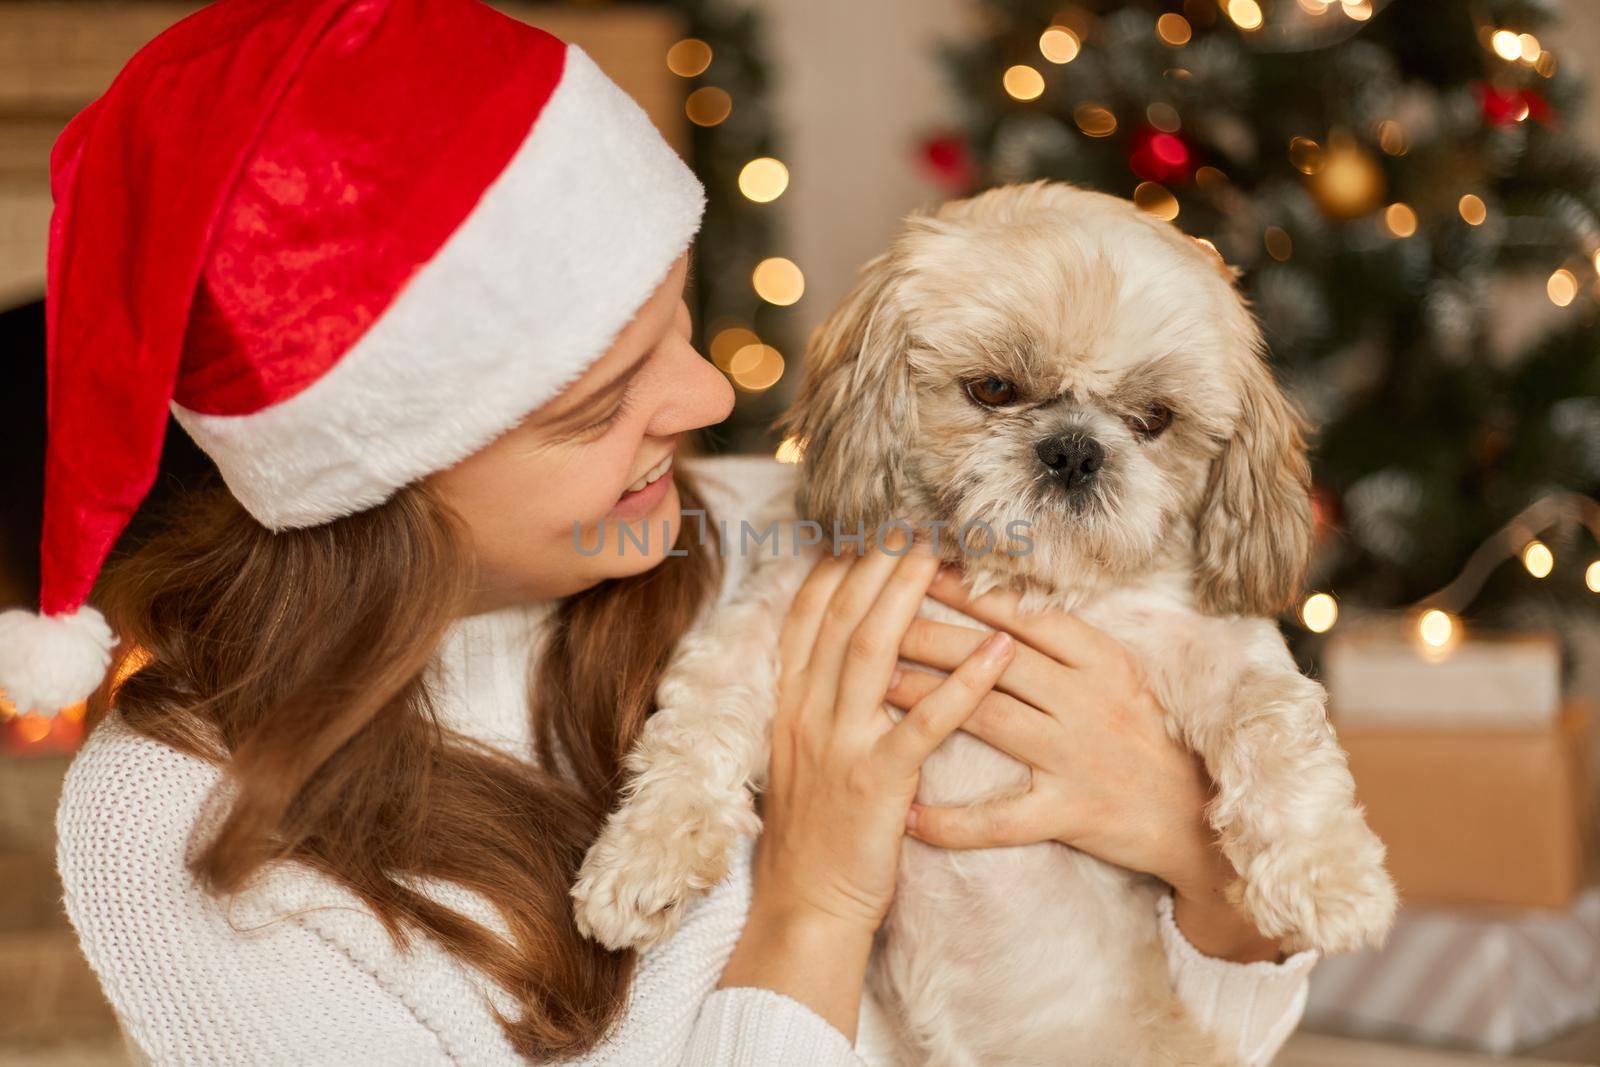 Happy woman with dog in christmas decoration posing indoor, lady wearing white jumper and red santa claus hat, looking at her puppy with smile, female with Pekingese celebrating holiday.